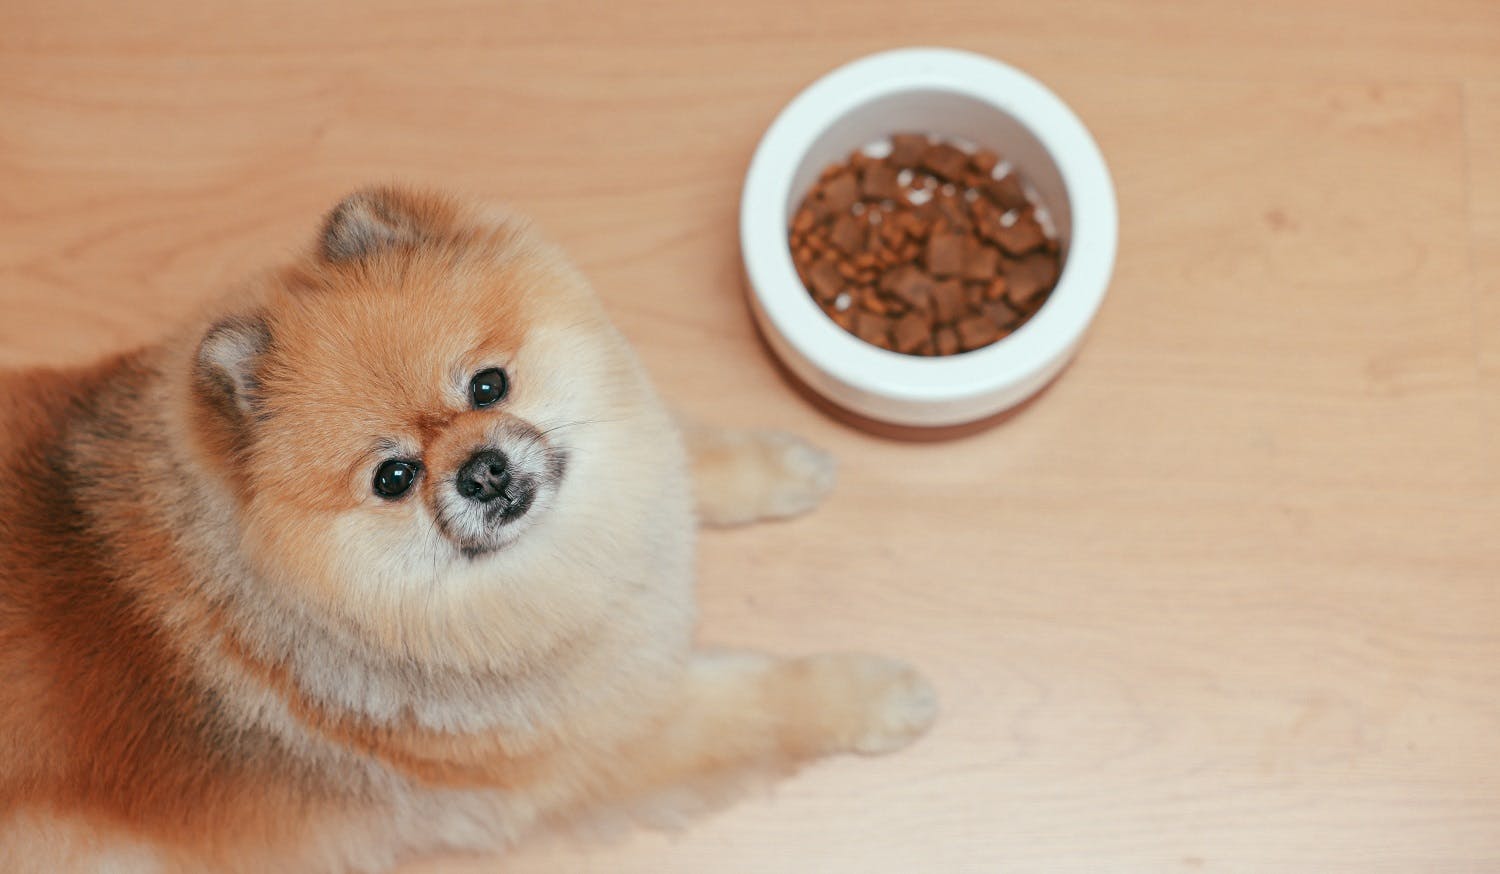 Dog with a full food bowl